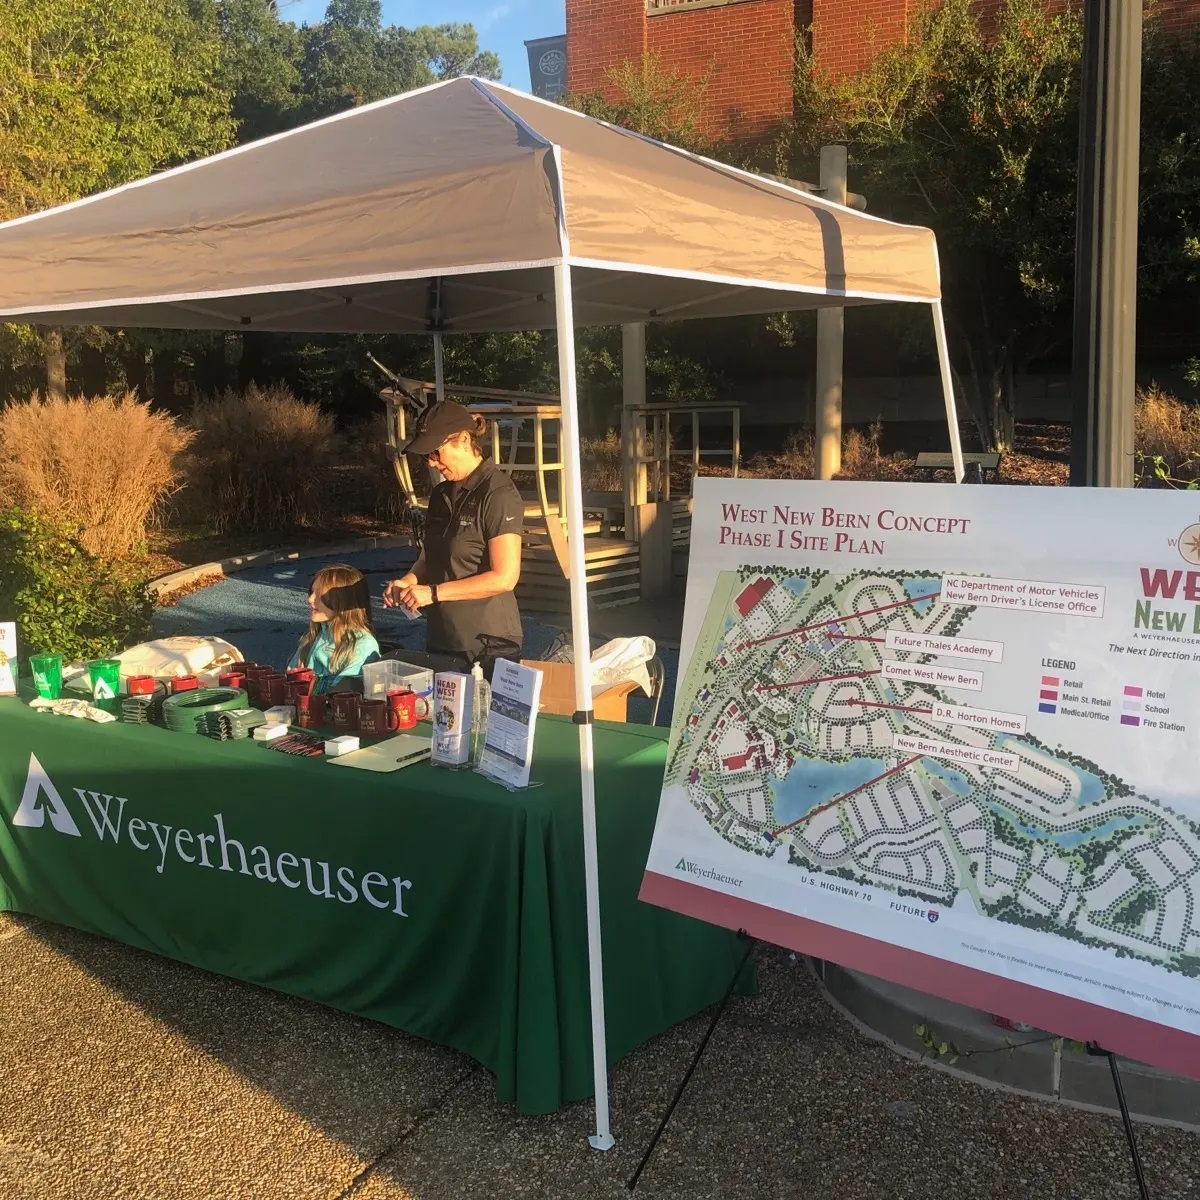 Image of the Weyerhaeuser booth at the race, which provided runners, their friends and family, and local residents with tchtchkes and info about Weyerhaeuser.